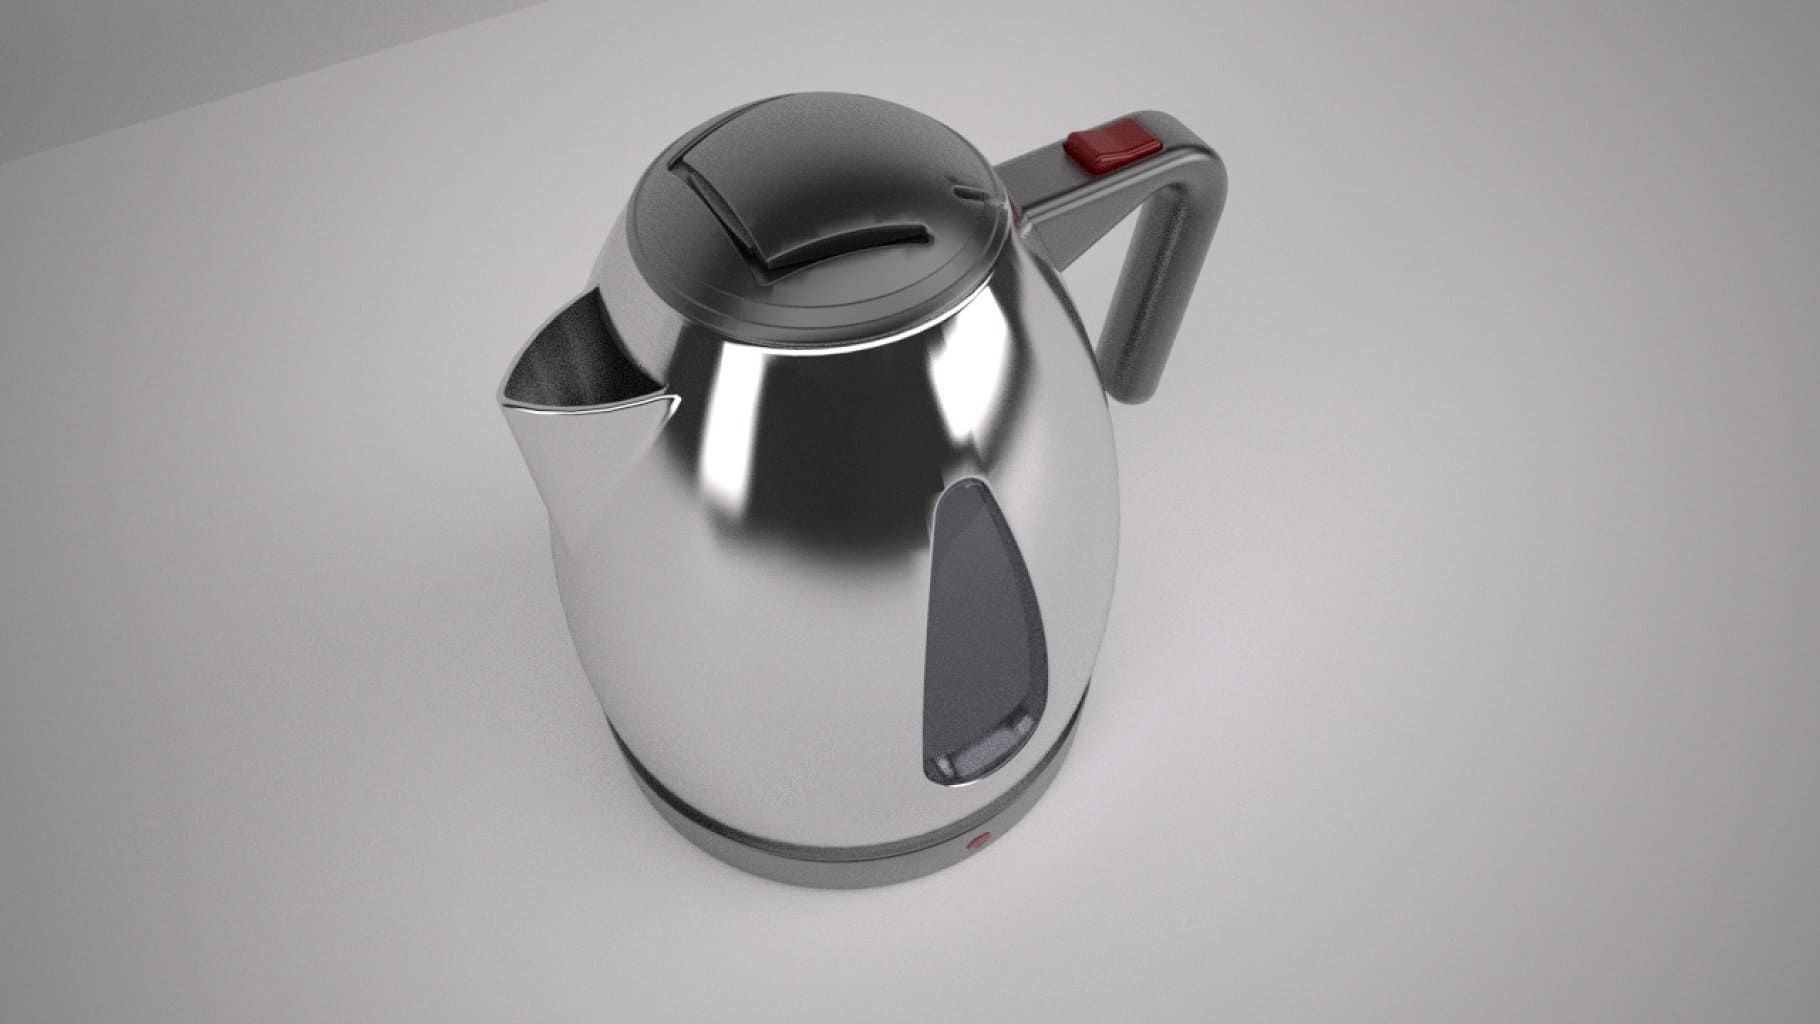 Metal electric kettle, top view.